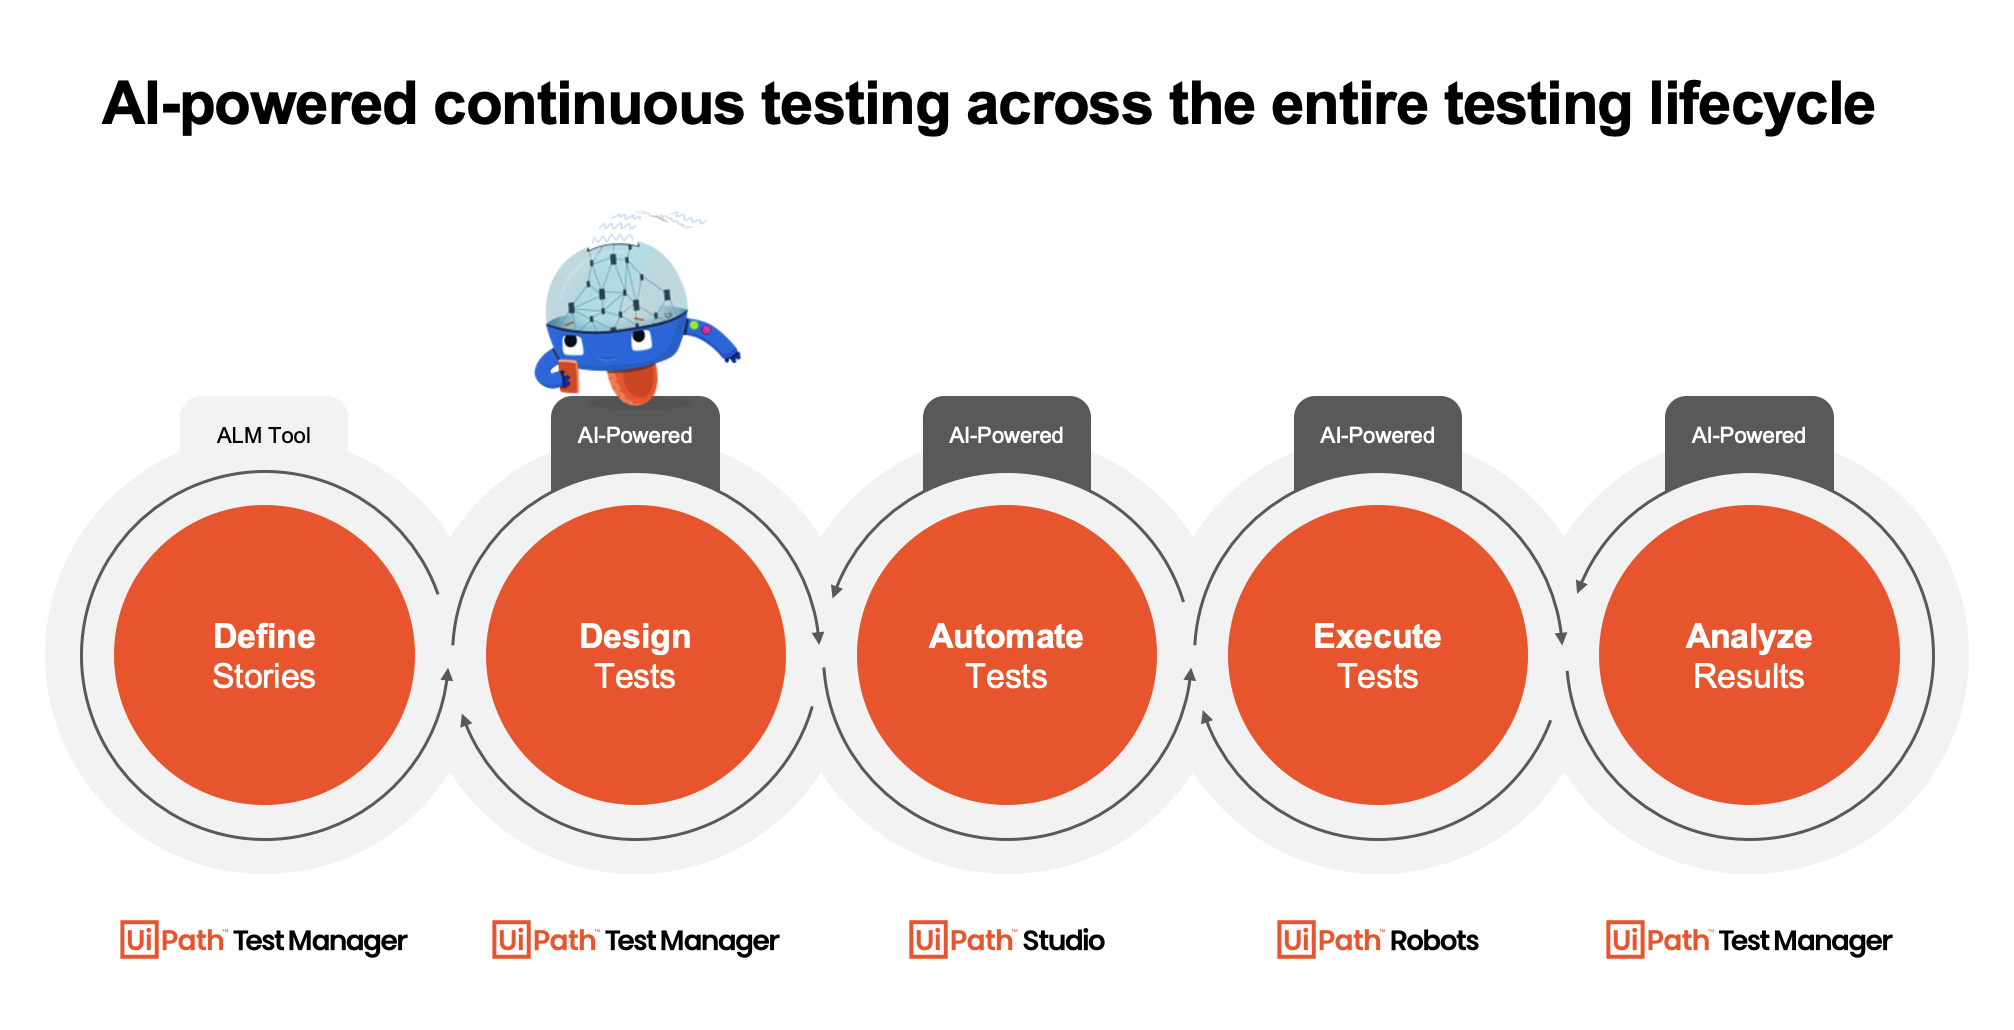 AI-powered continuous testing